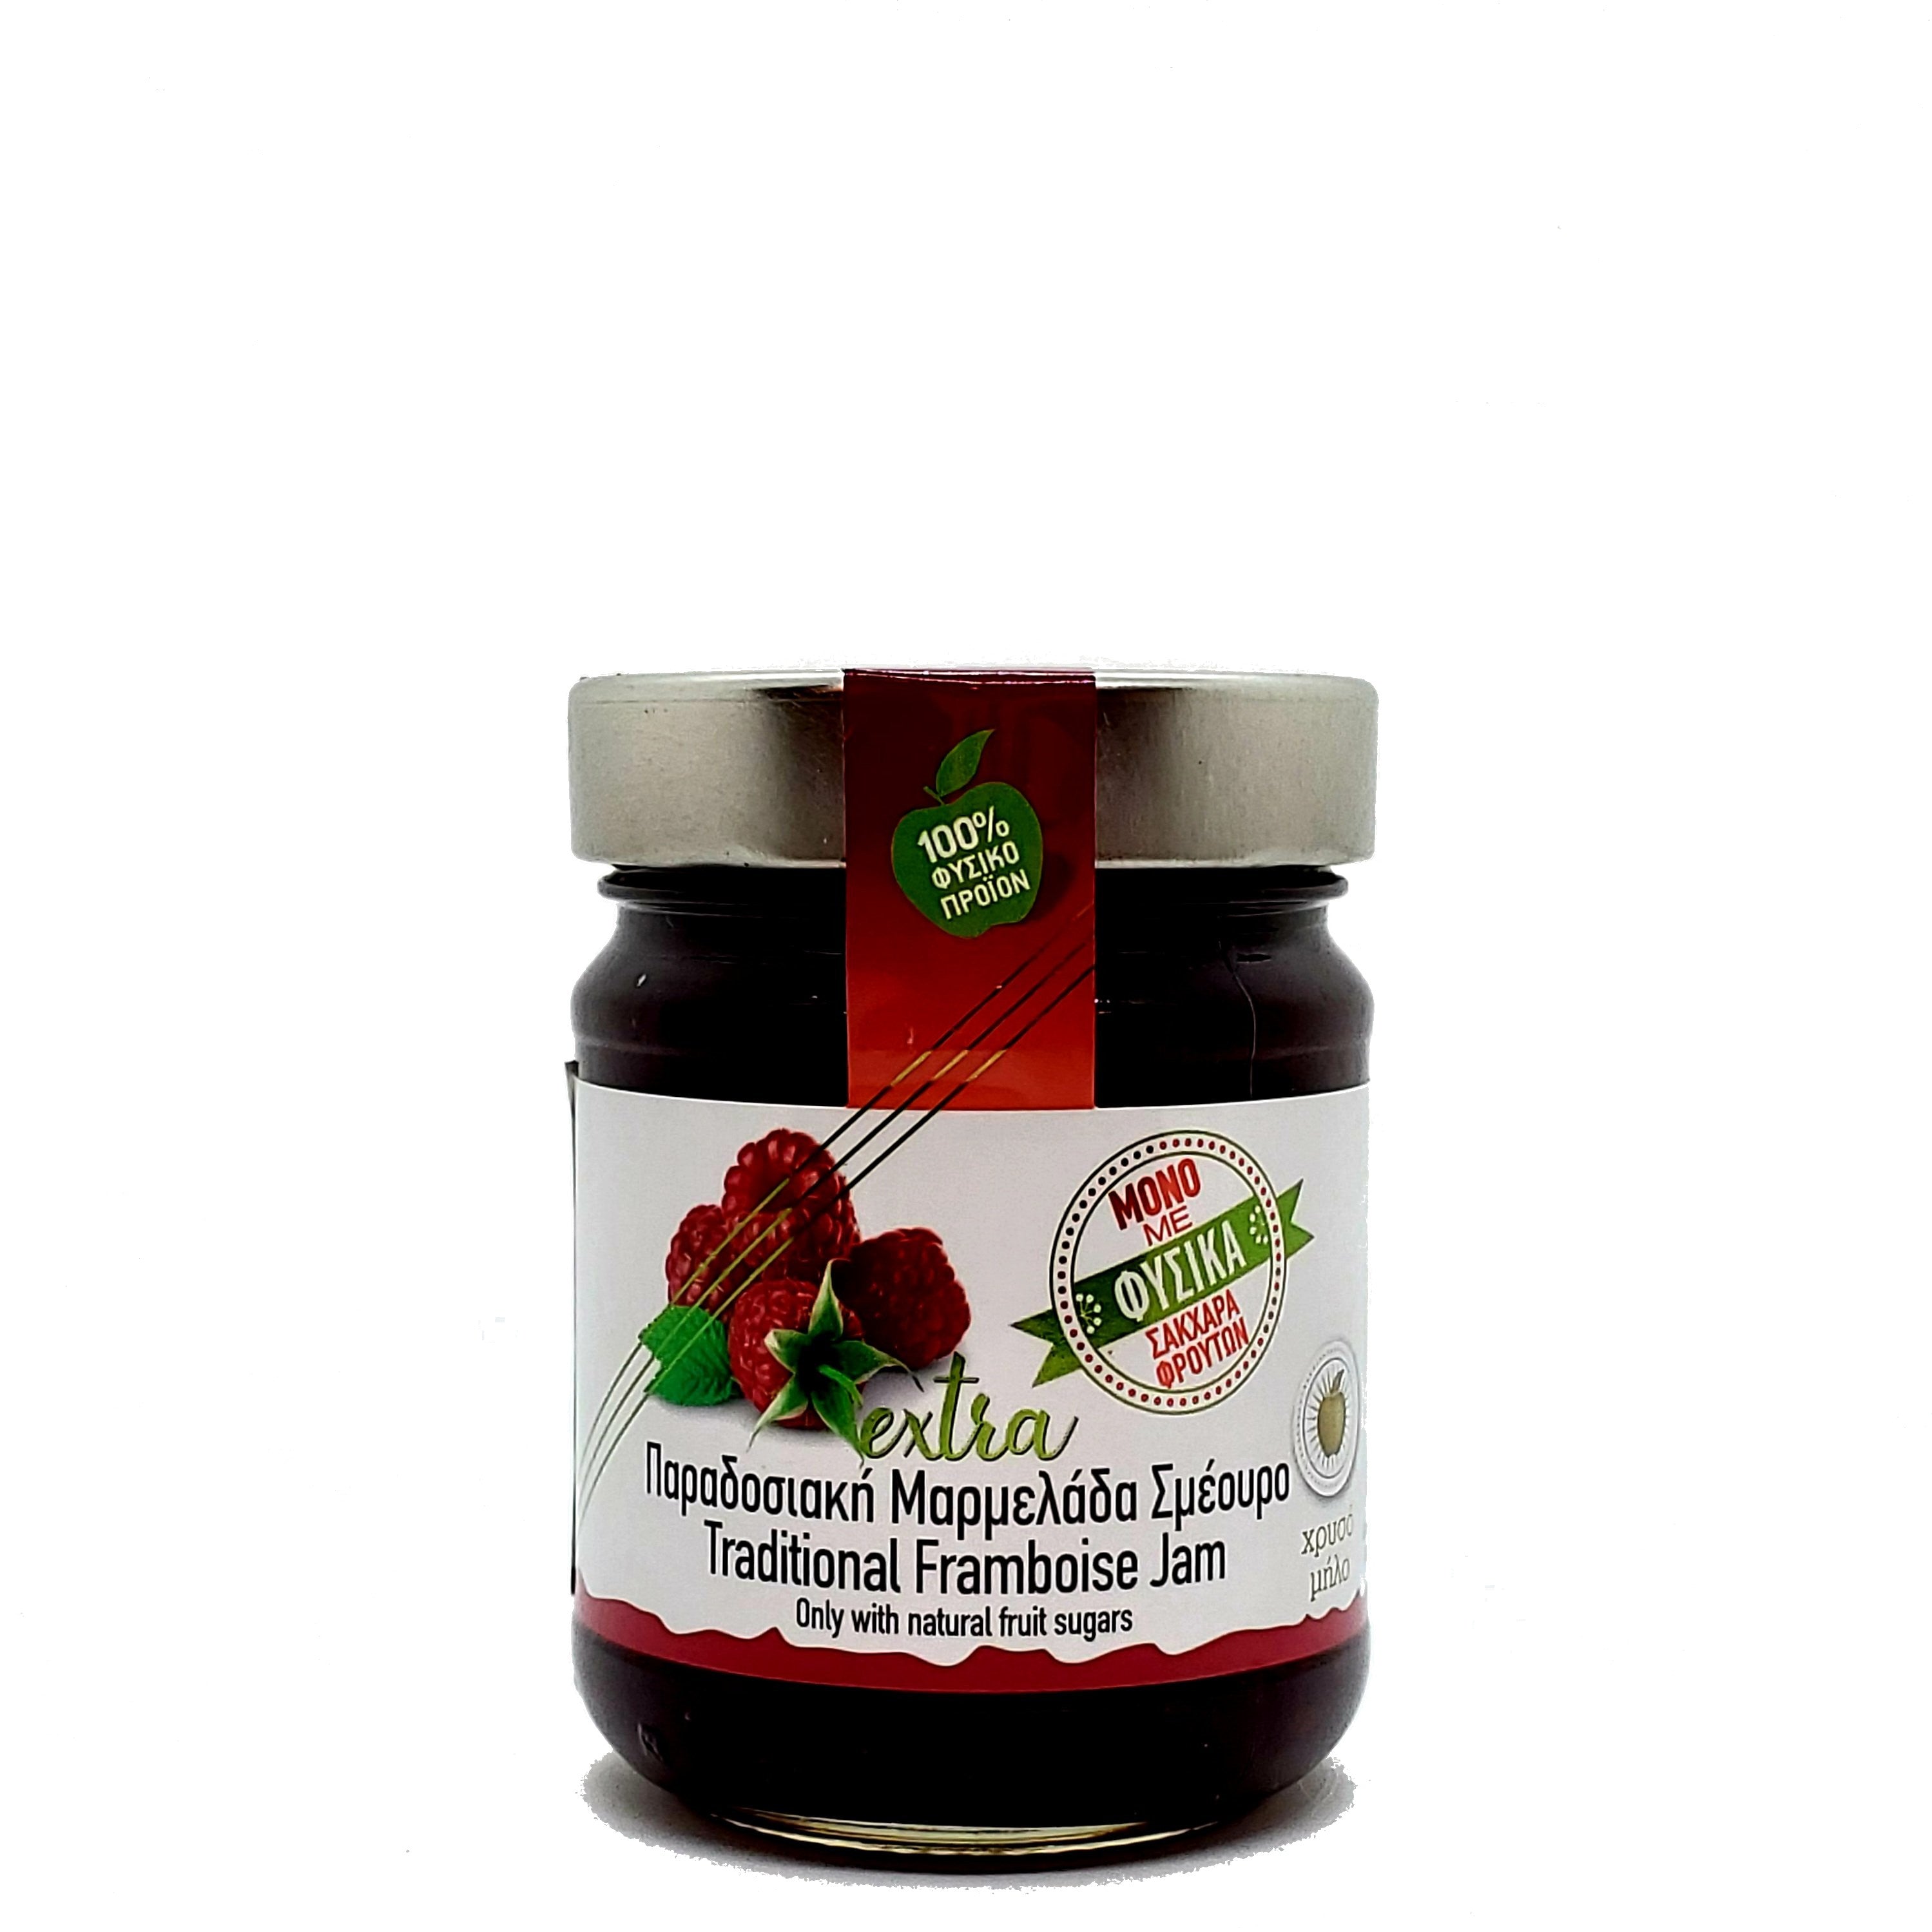 Traditional Framboise Jam from Pelion - No Added Sugar